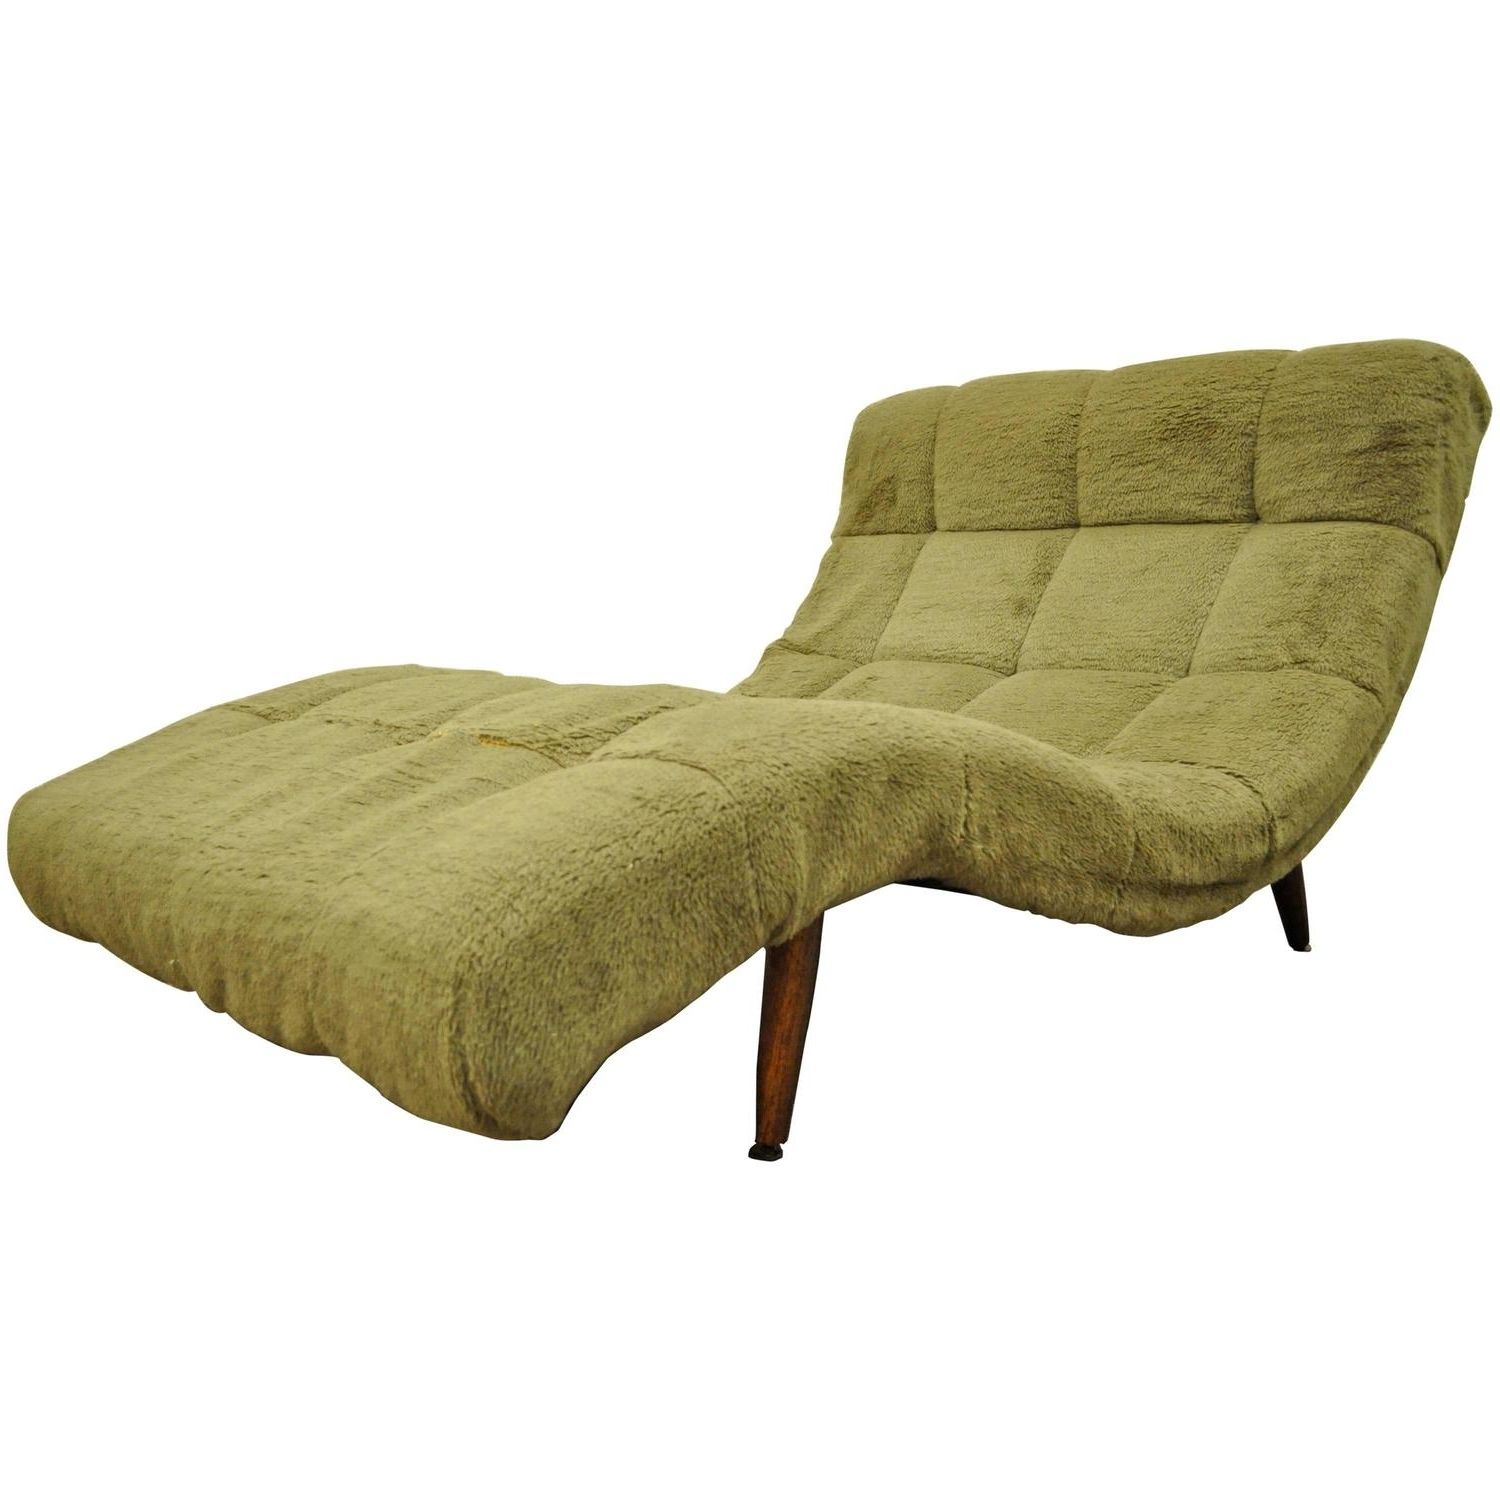 Midcentury Modern Double Wide Wave Chaise Lounge In The Style Of Regarding Recent Wide Chaise Lounges (View 2 of 15)